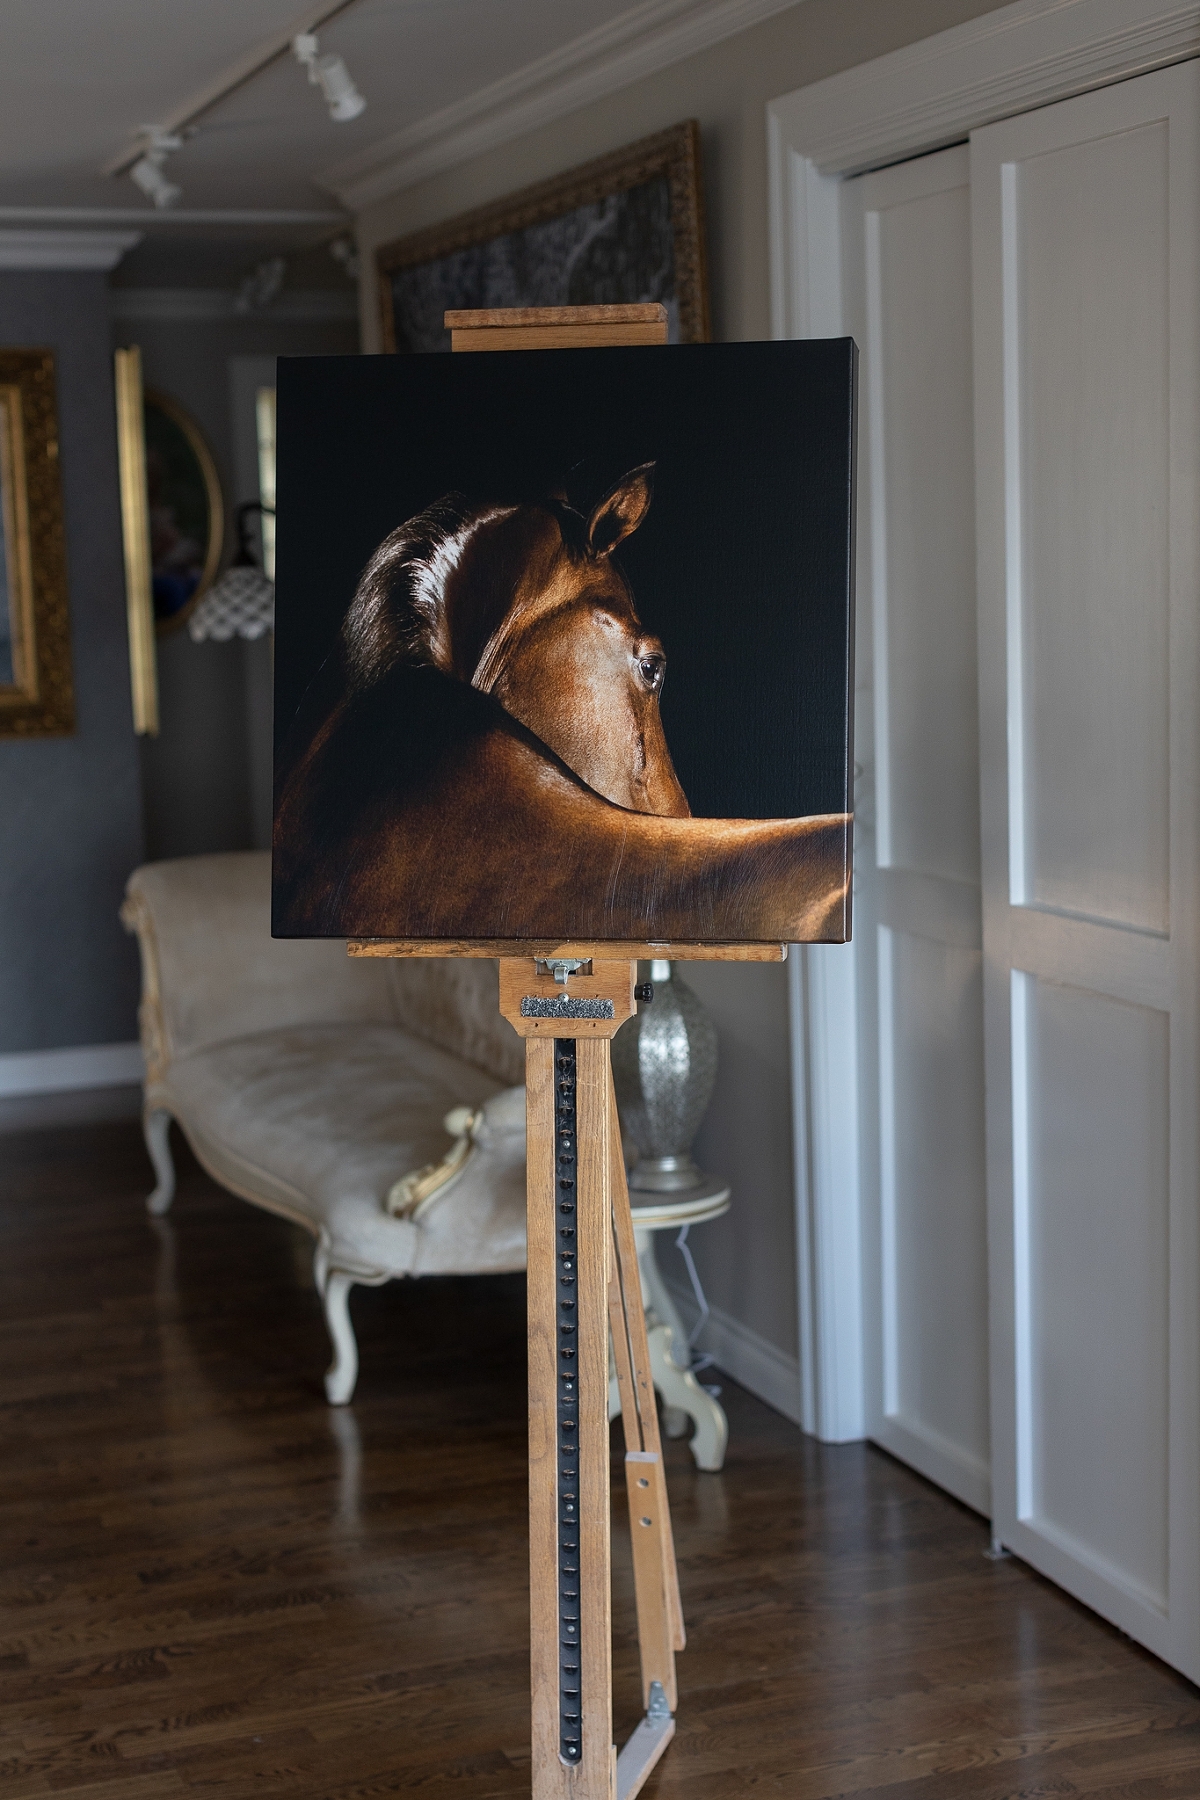 A painting of a horse displayed on an easel in an elegantly furnished room.